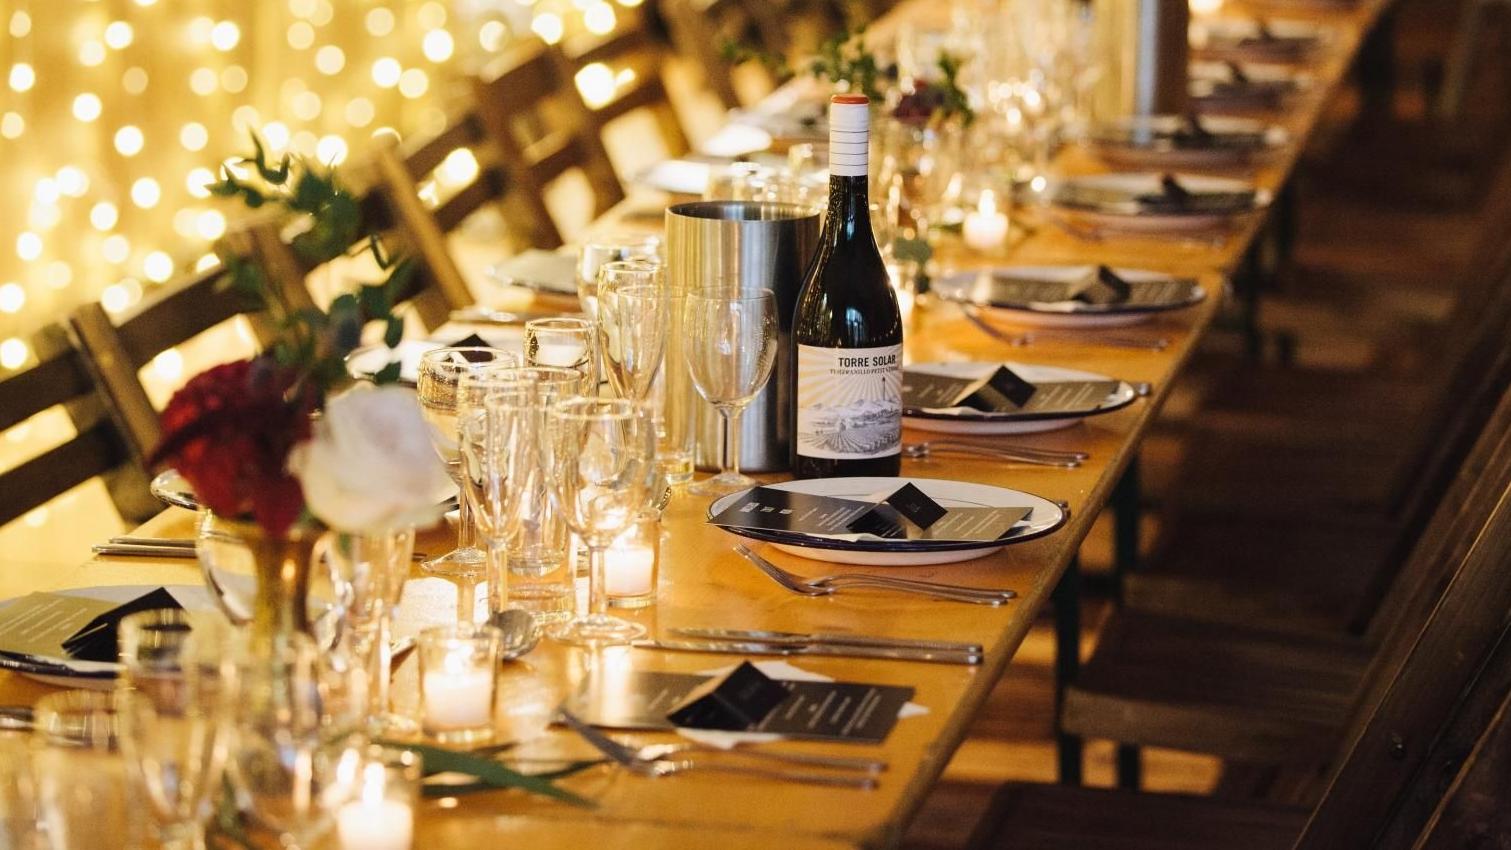 Find your Wedding Venue in South East Melbourne